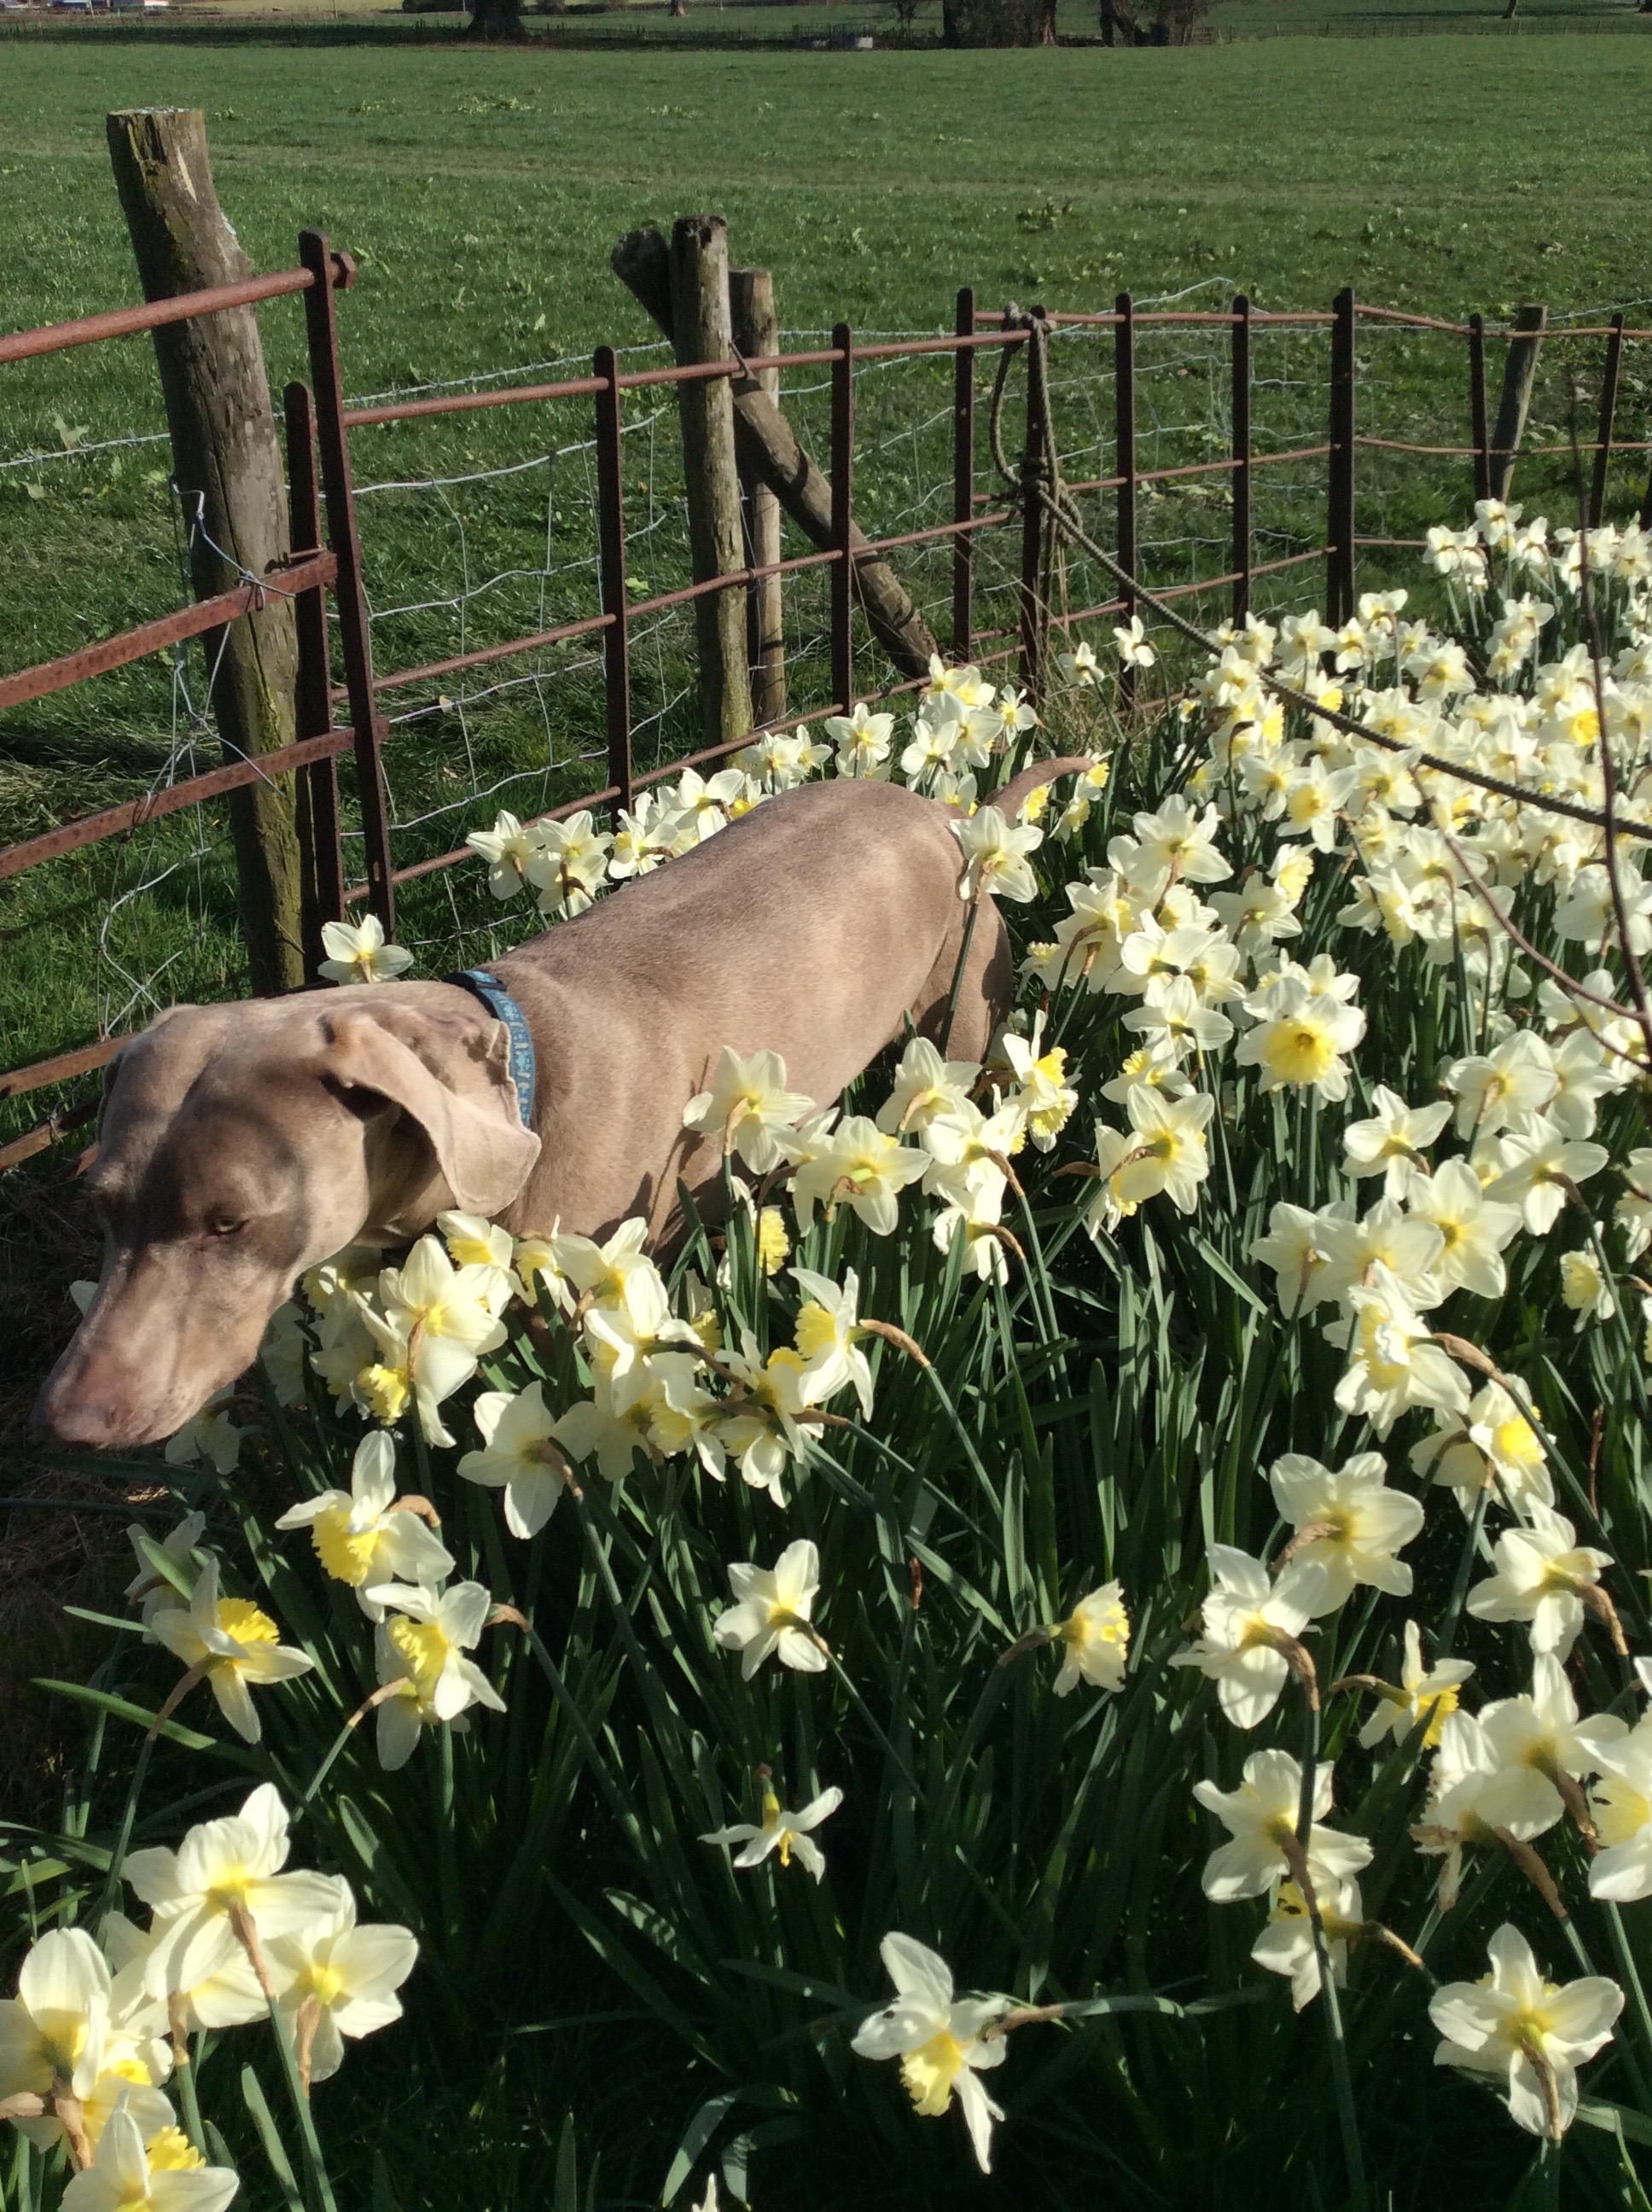 You are currently viewing Our Weimaraner inspecting daffodils